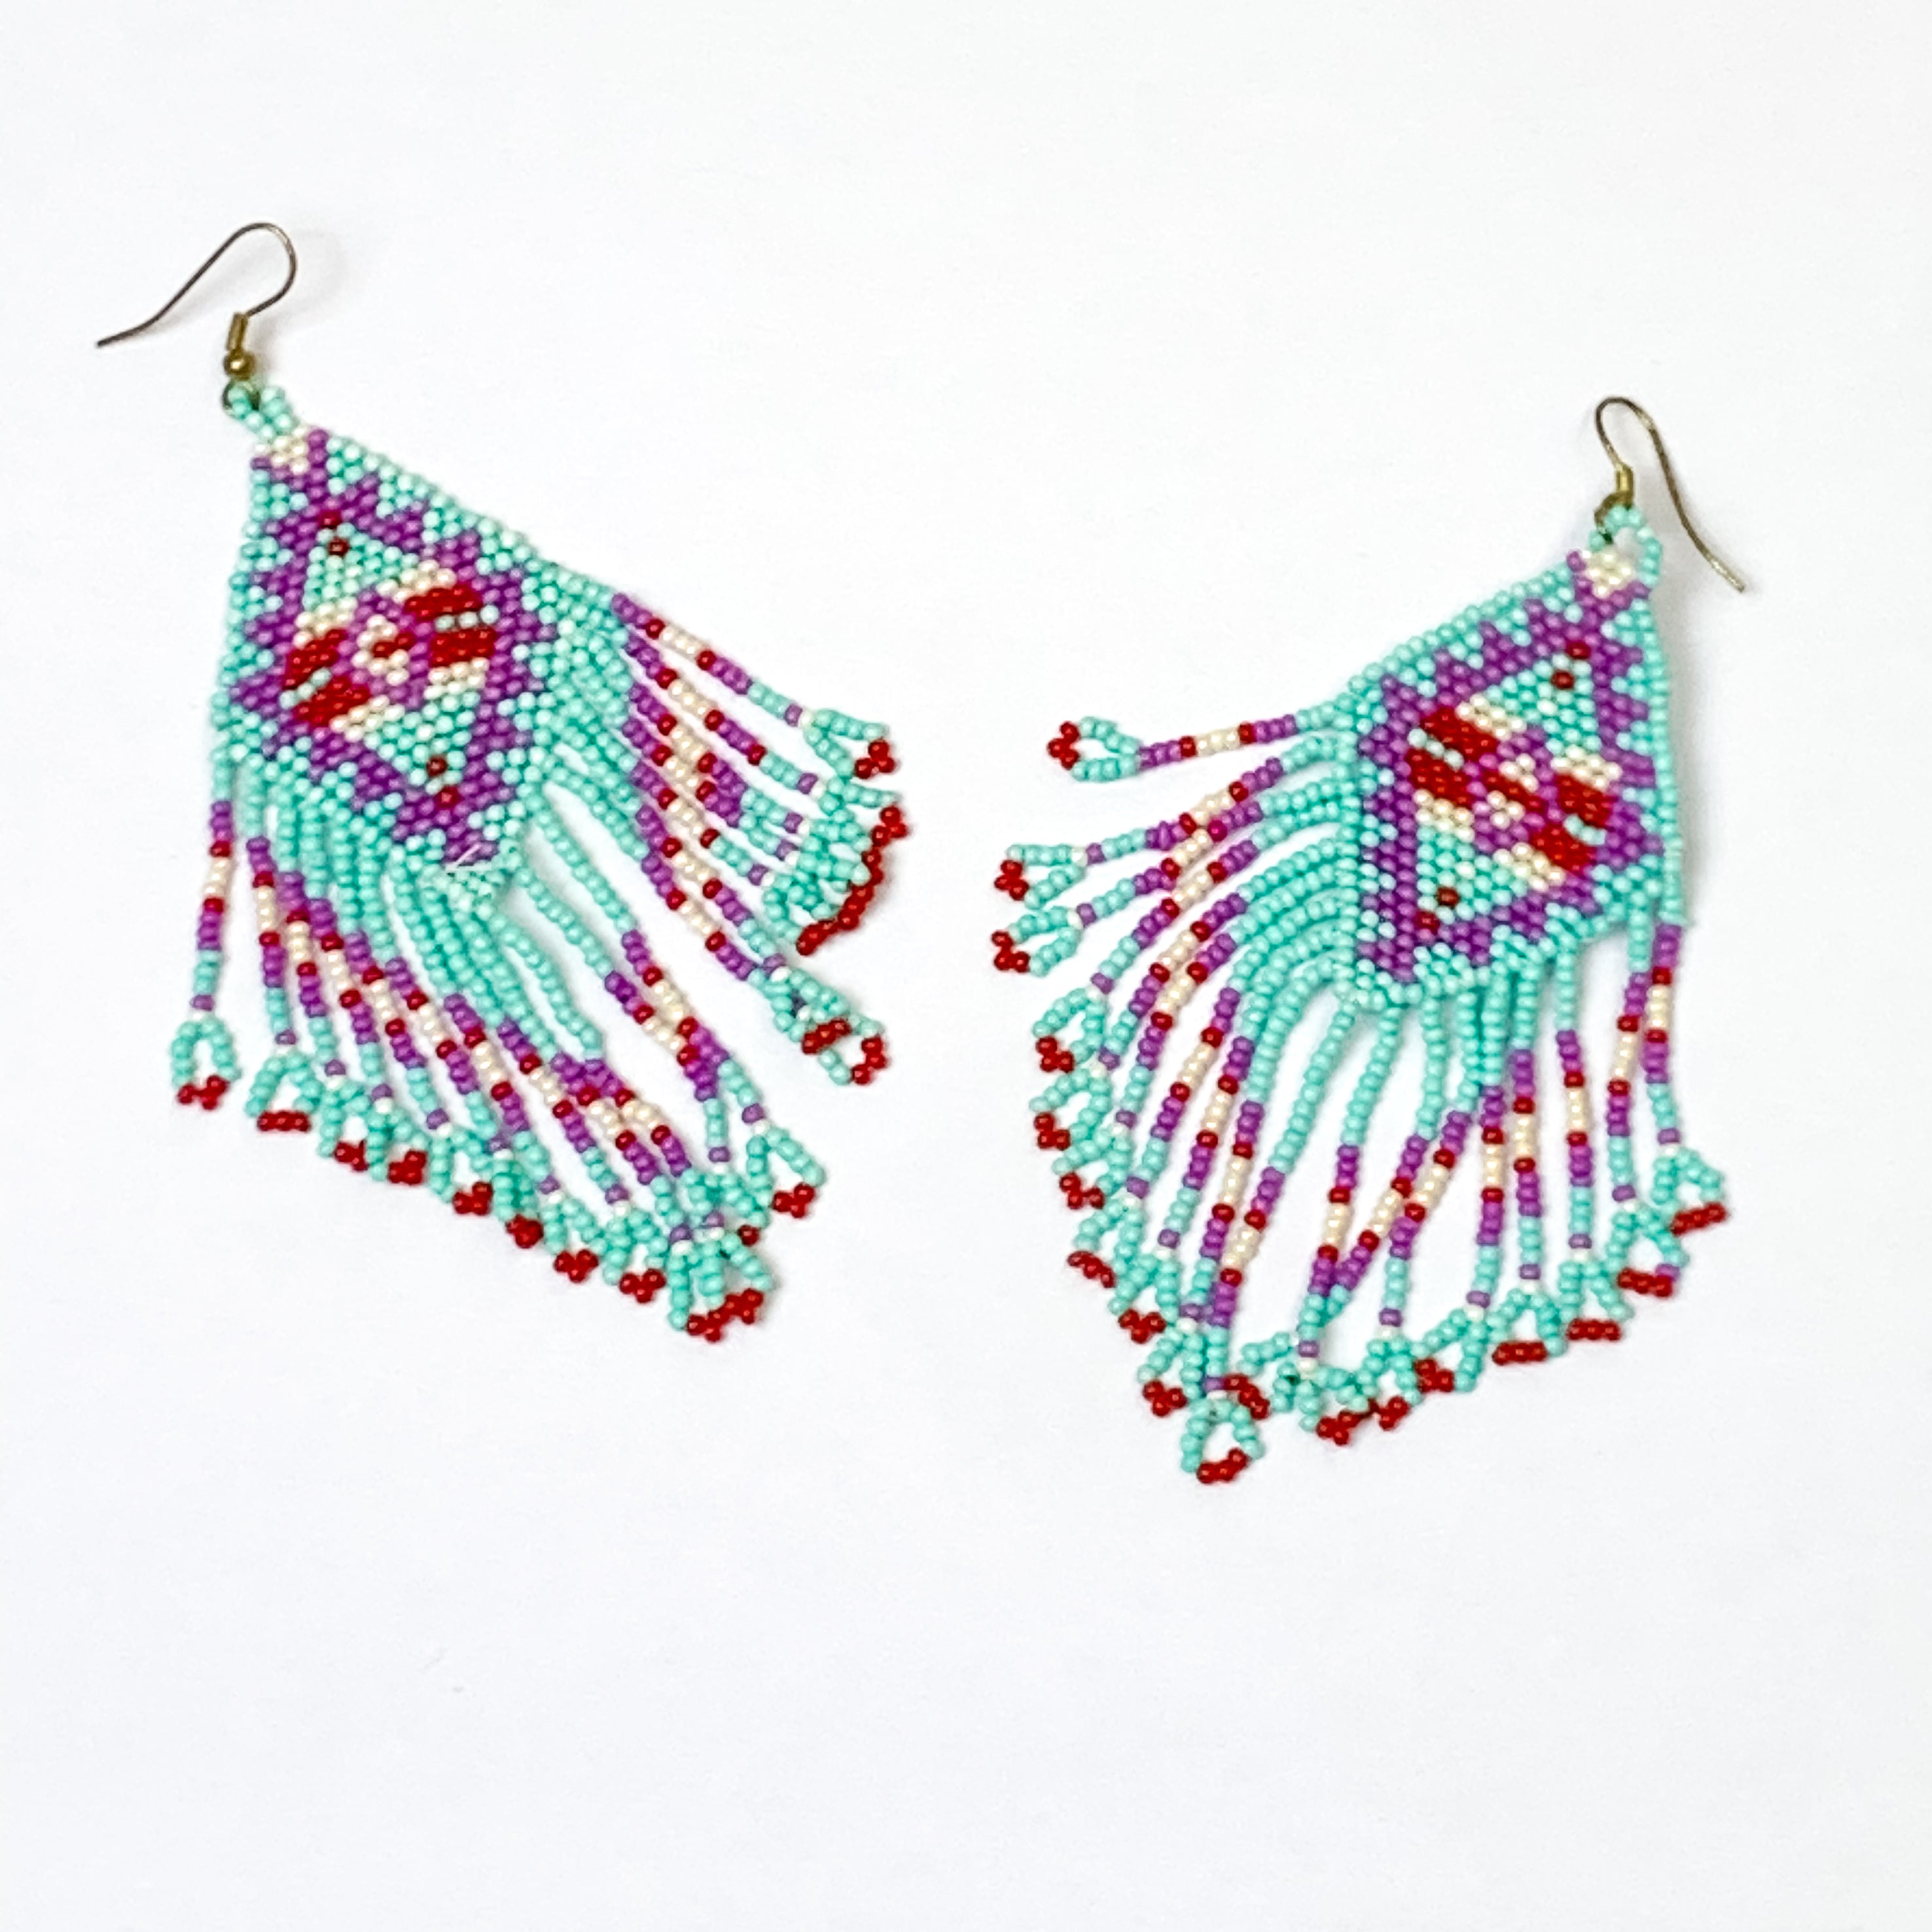 Diamond Shaped Seed Bead Fringe Earrings in Multicolor - Giddy Up Glamour Boutique